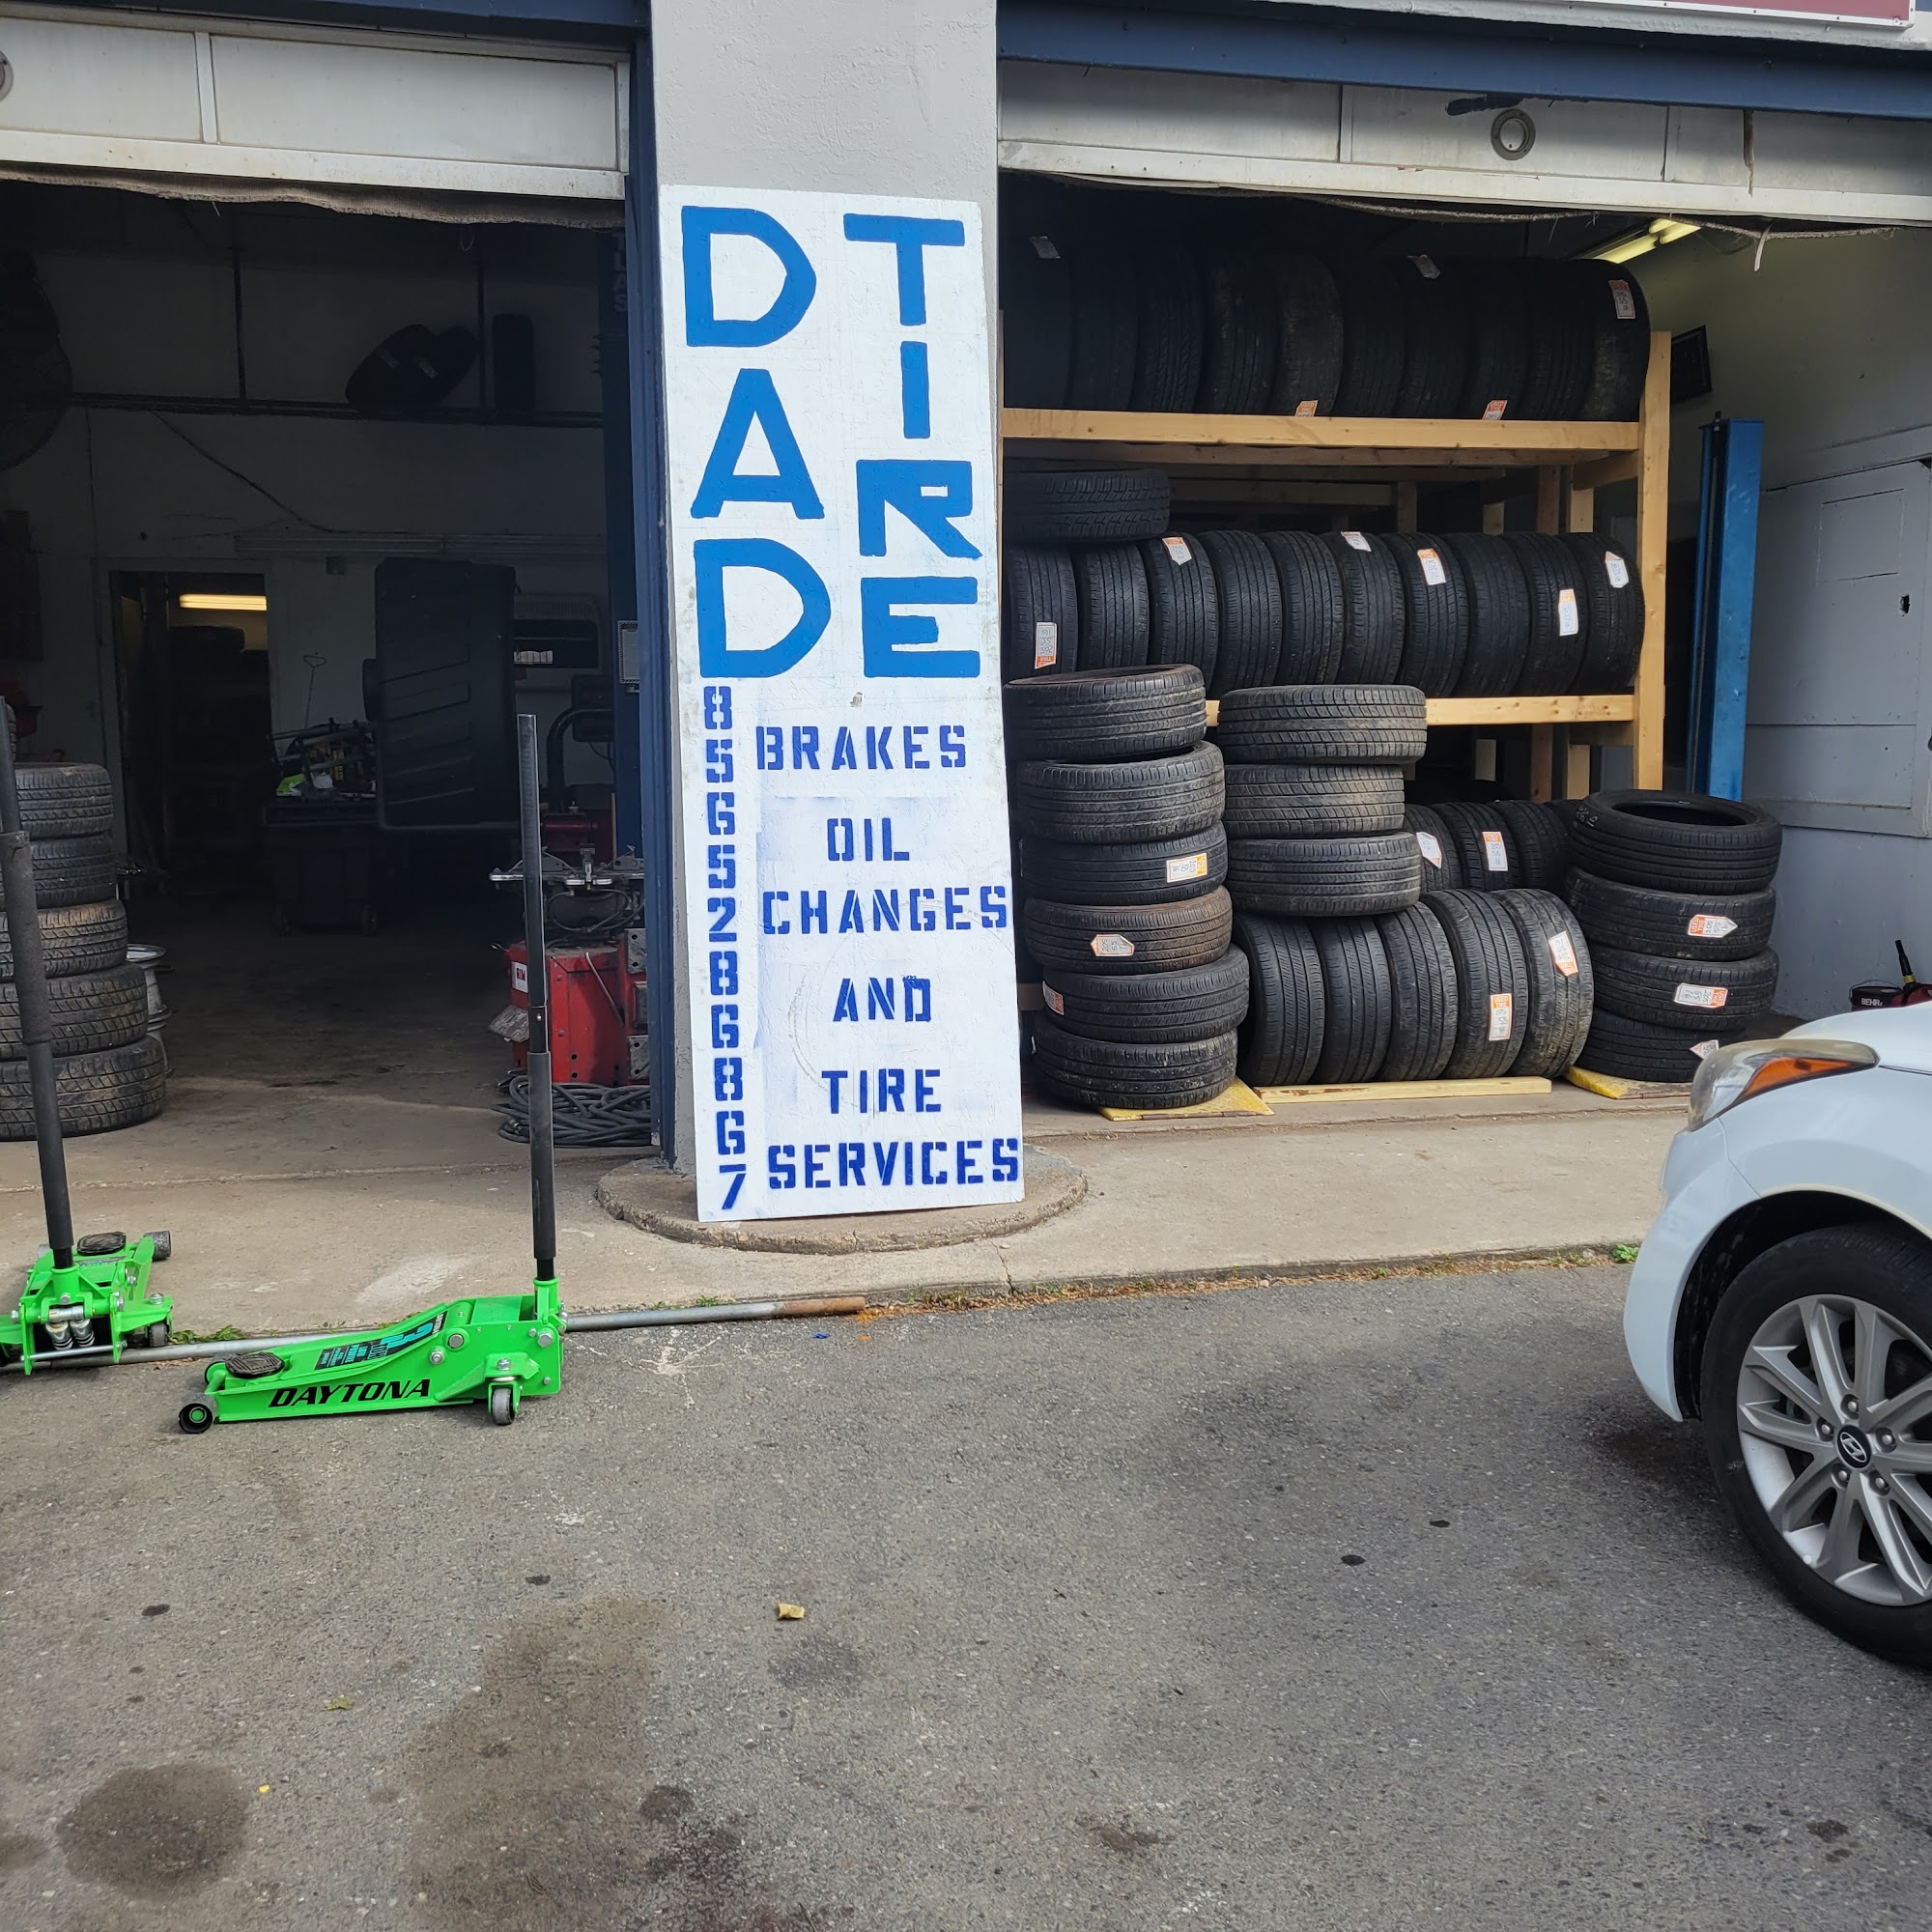 Dad tires and Auto care (New & Used Tires)